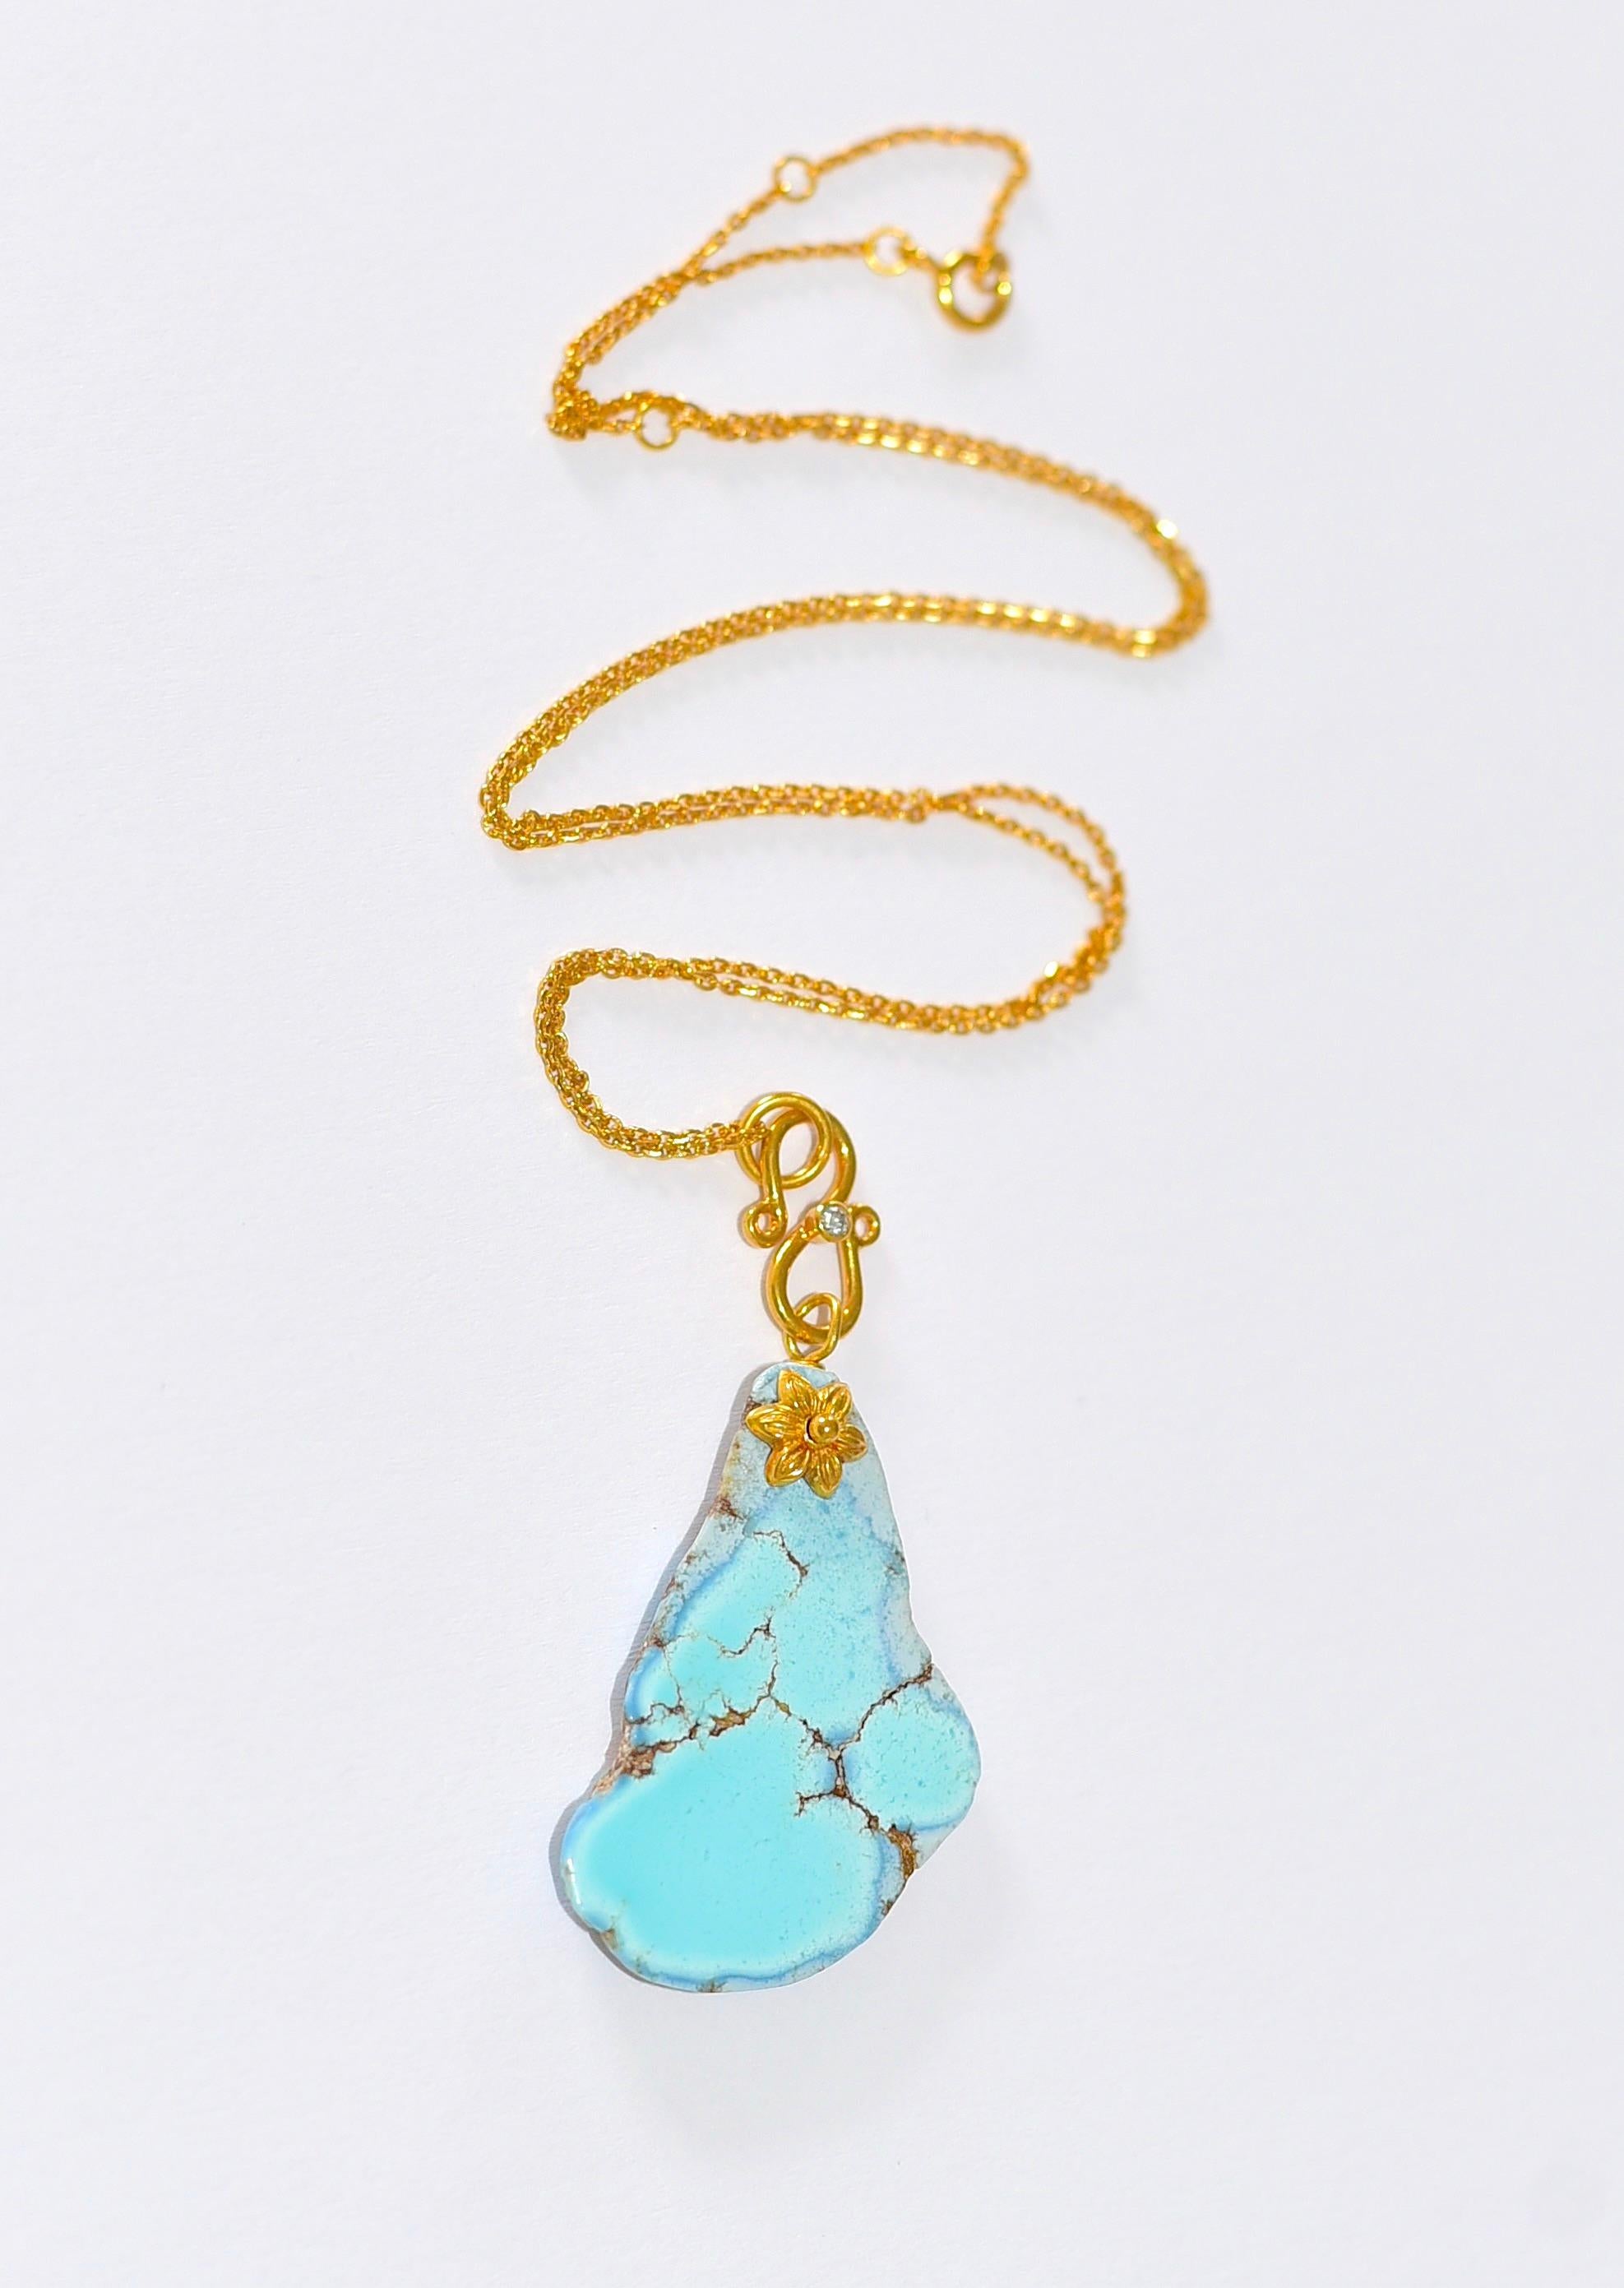 Women's Kazakhstan Lavender Turquoise Necklace in 18K Solid Yellow Gold, Diamond